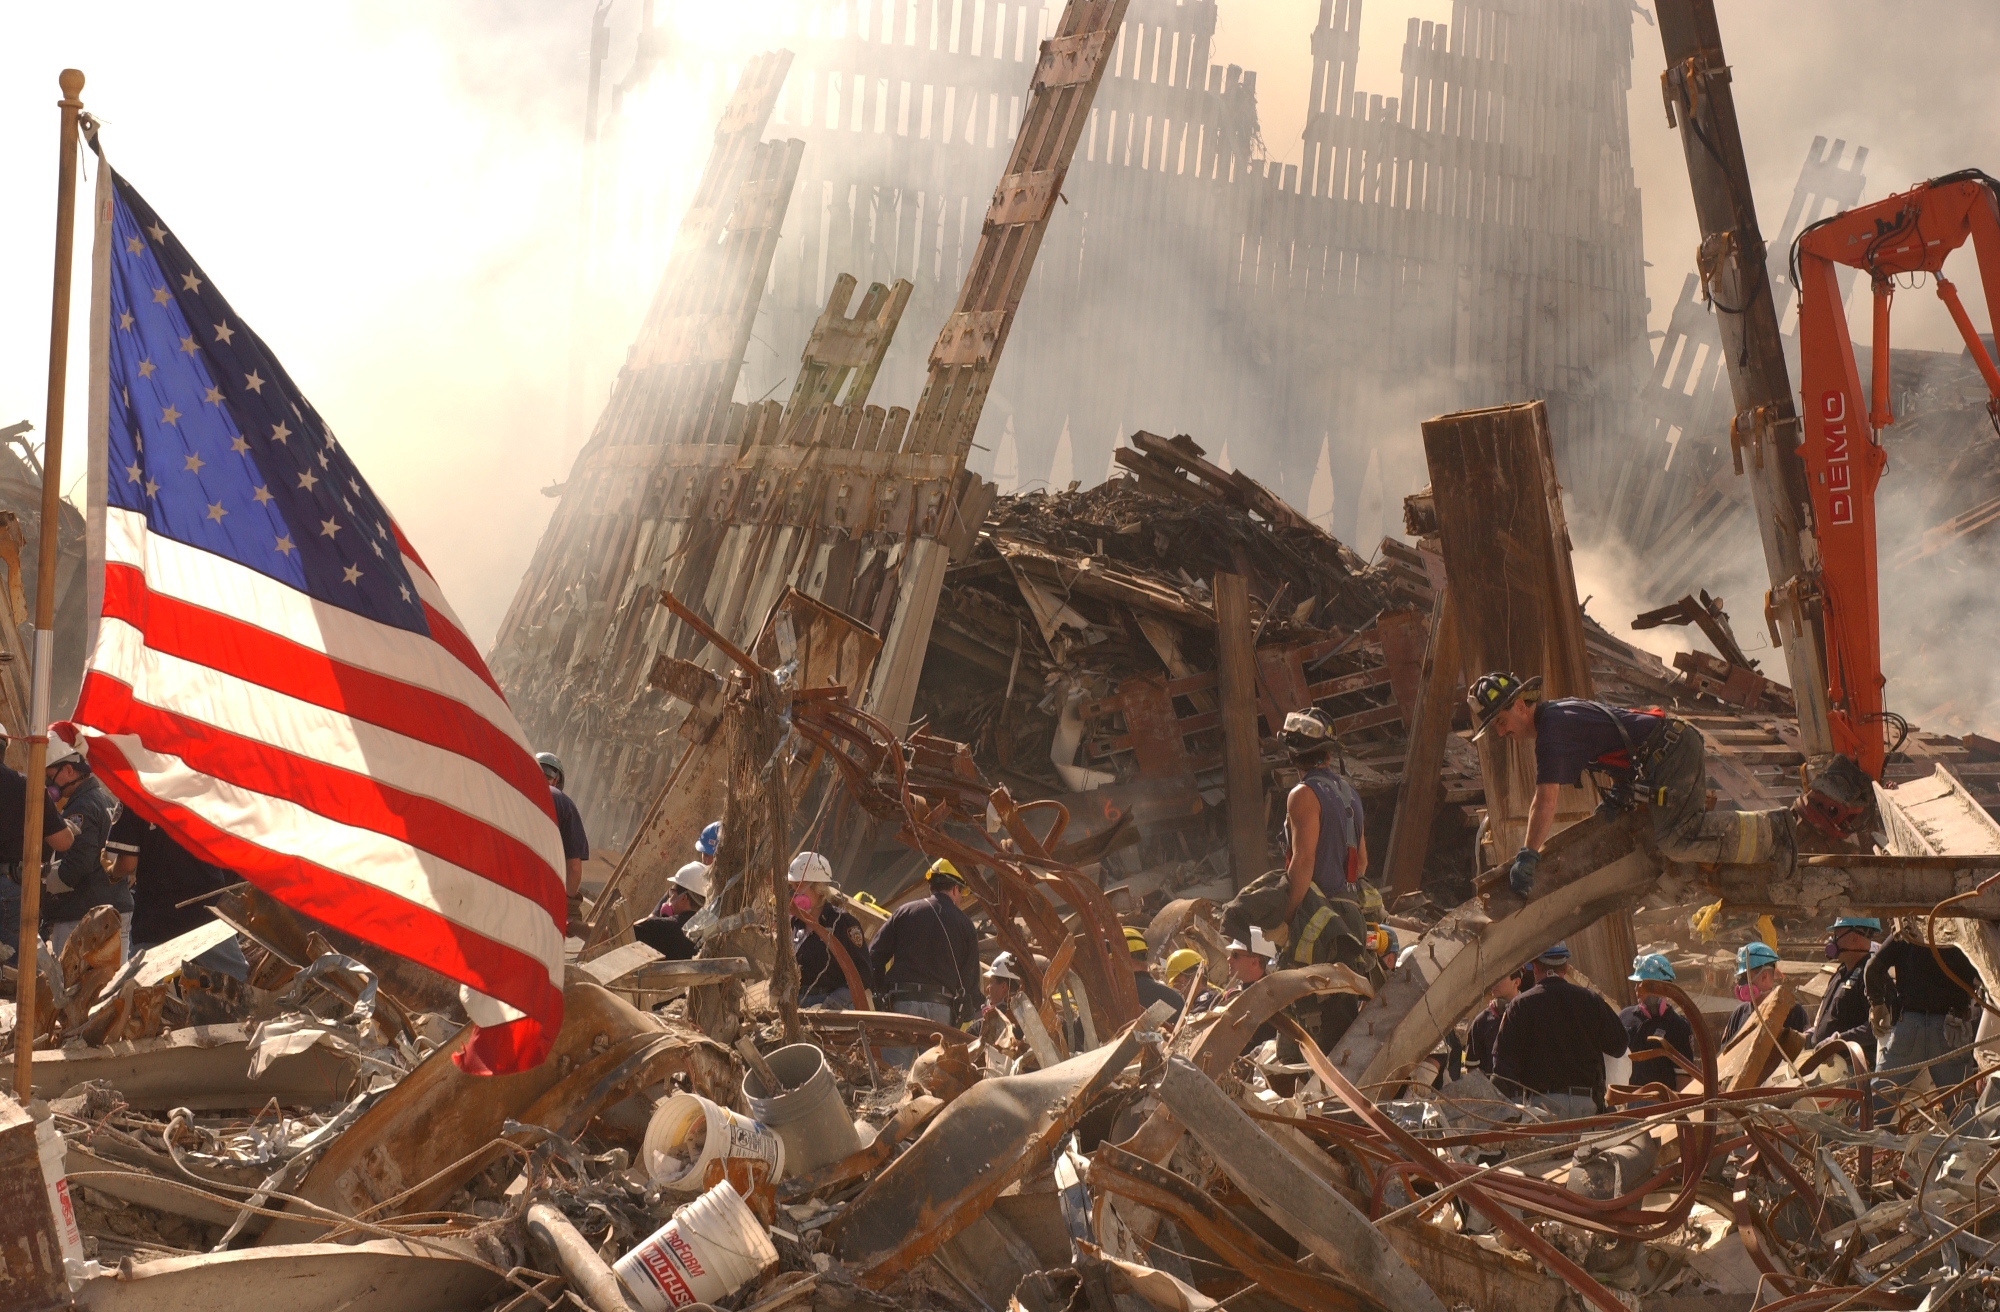 rage, enmity, 9-11